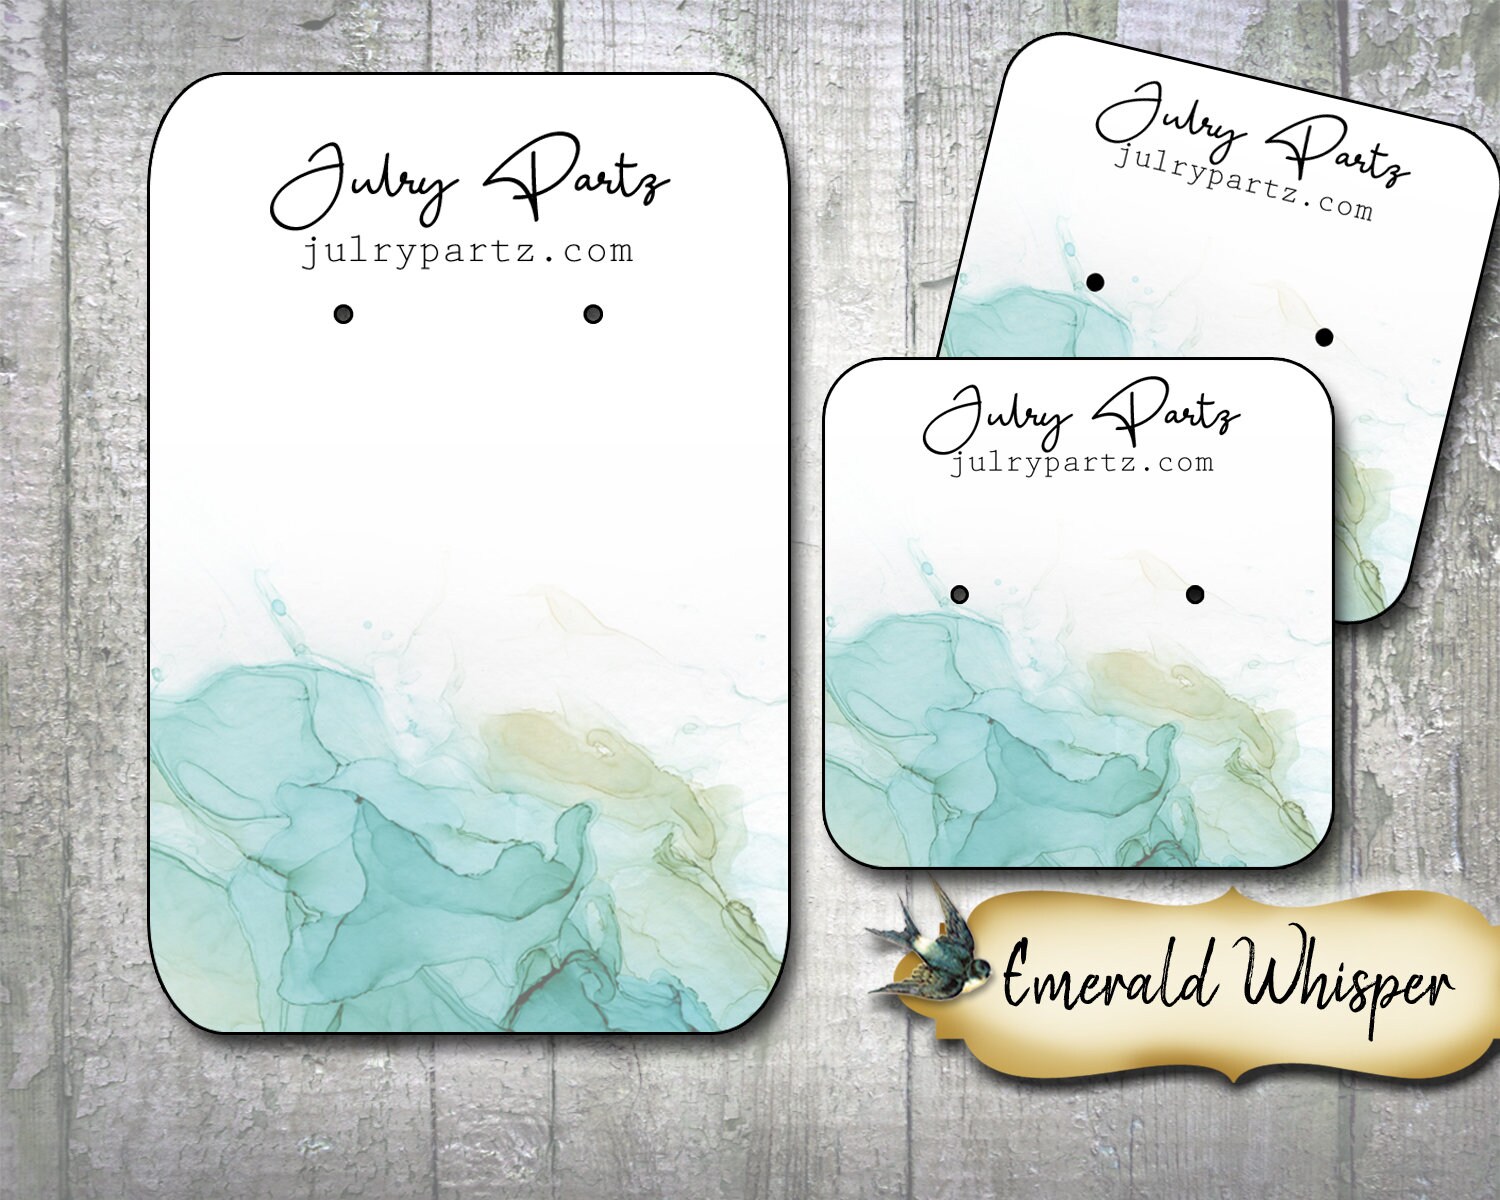 Template of Earring Necklace Card 3.5x2.3 2 Holes -   Jewelry display  cards, Jewelry packaging, Earring card display